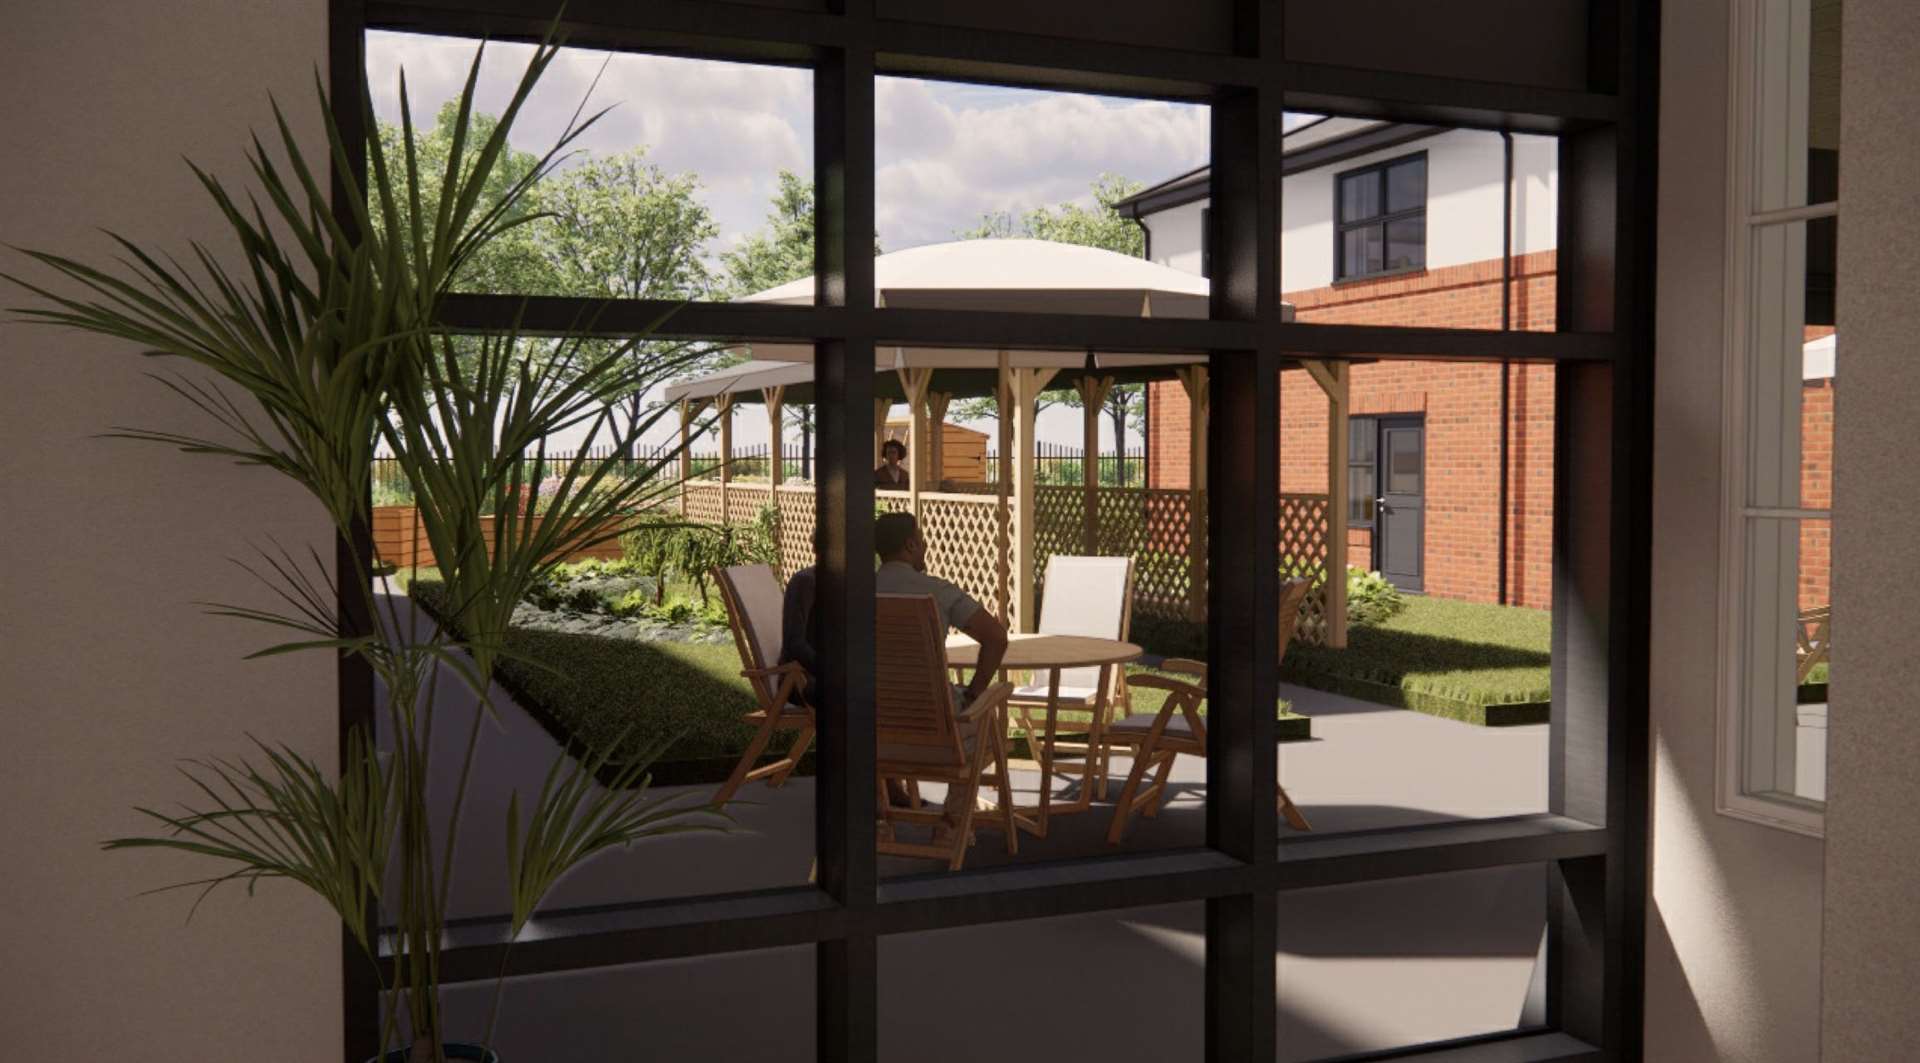 The scheme has support from some residents who say it will create jobs. Picture: LNT Care Developments